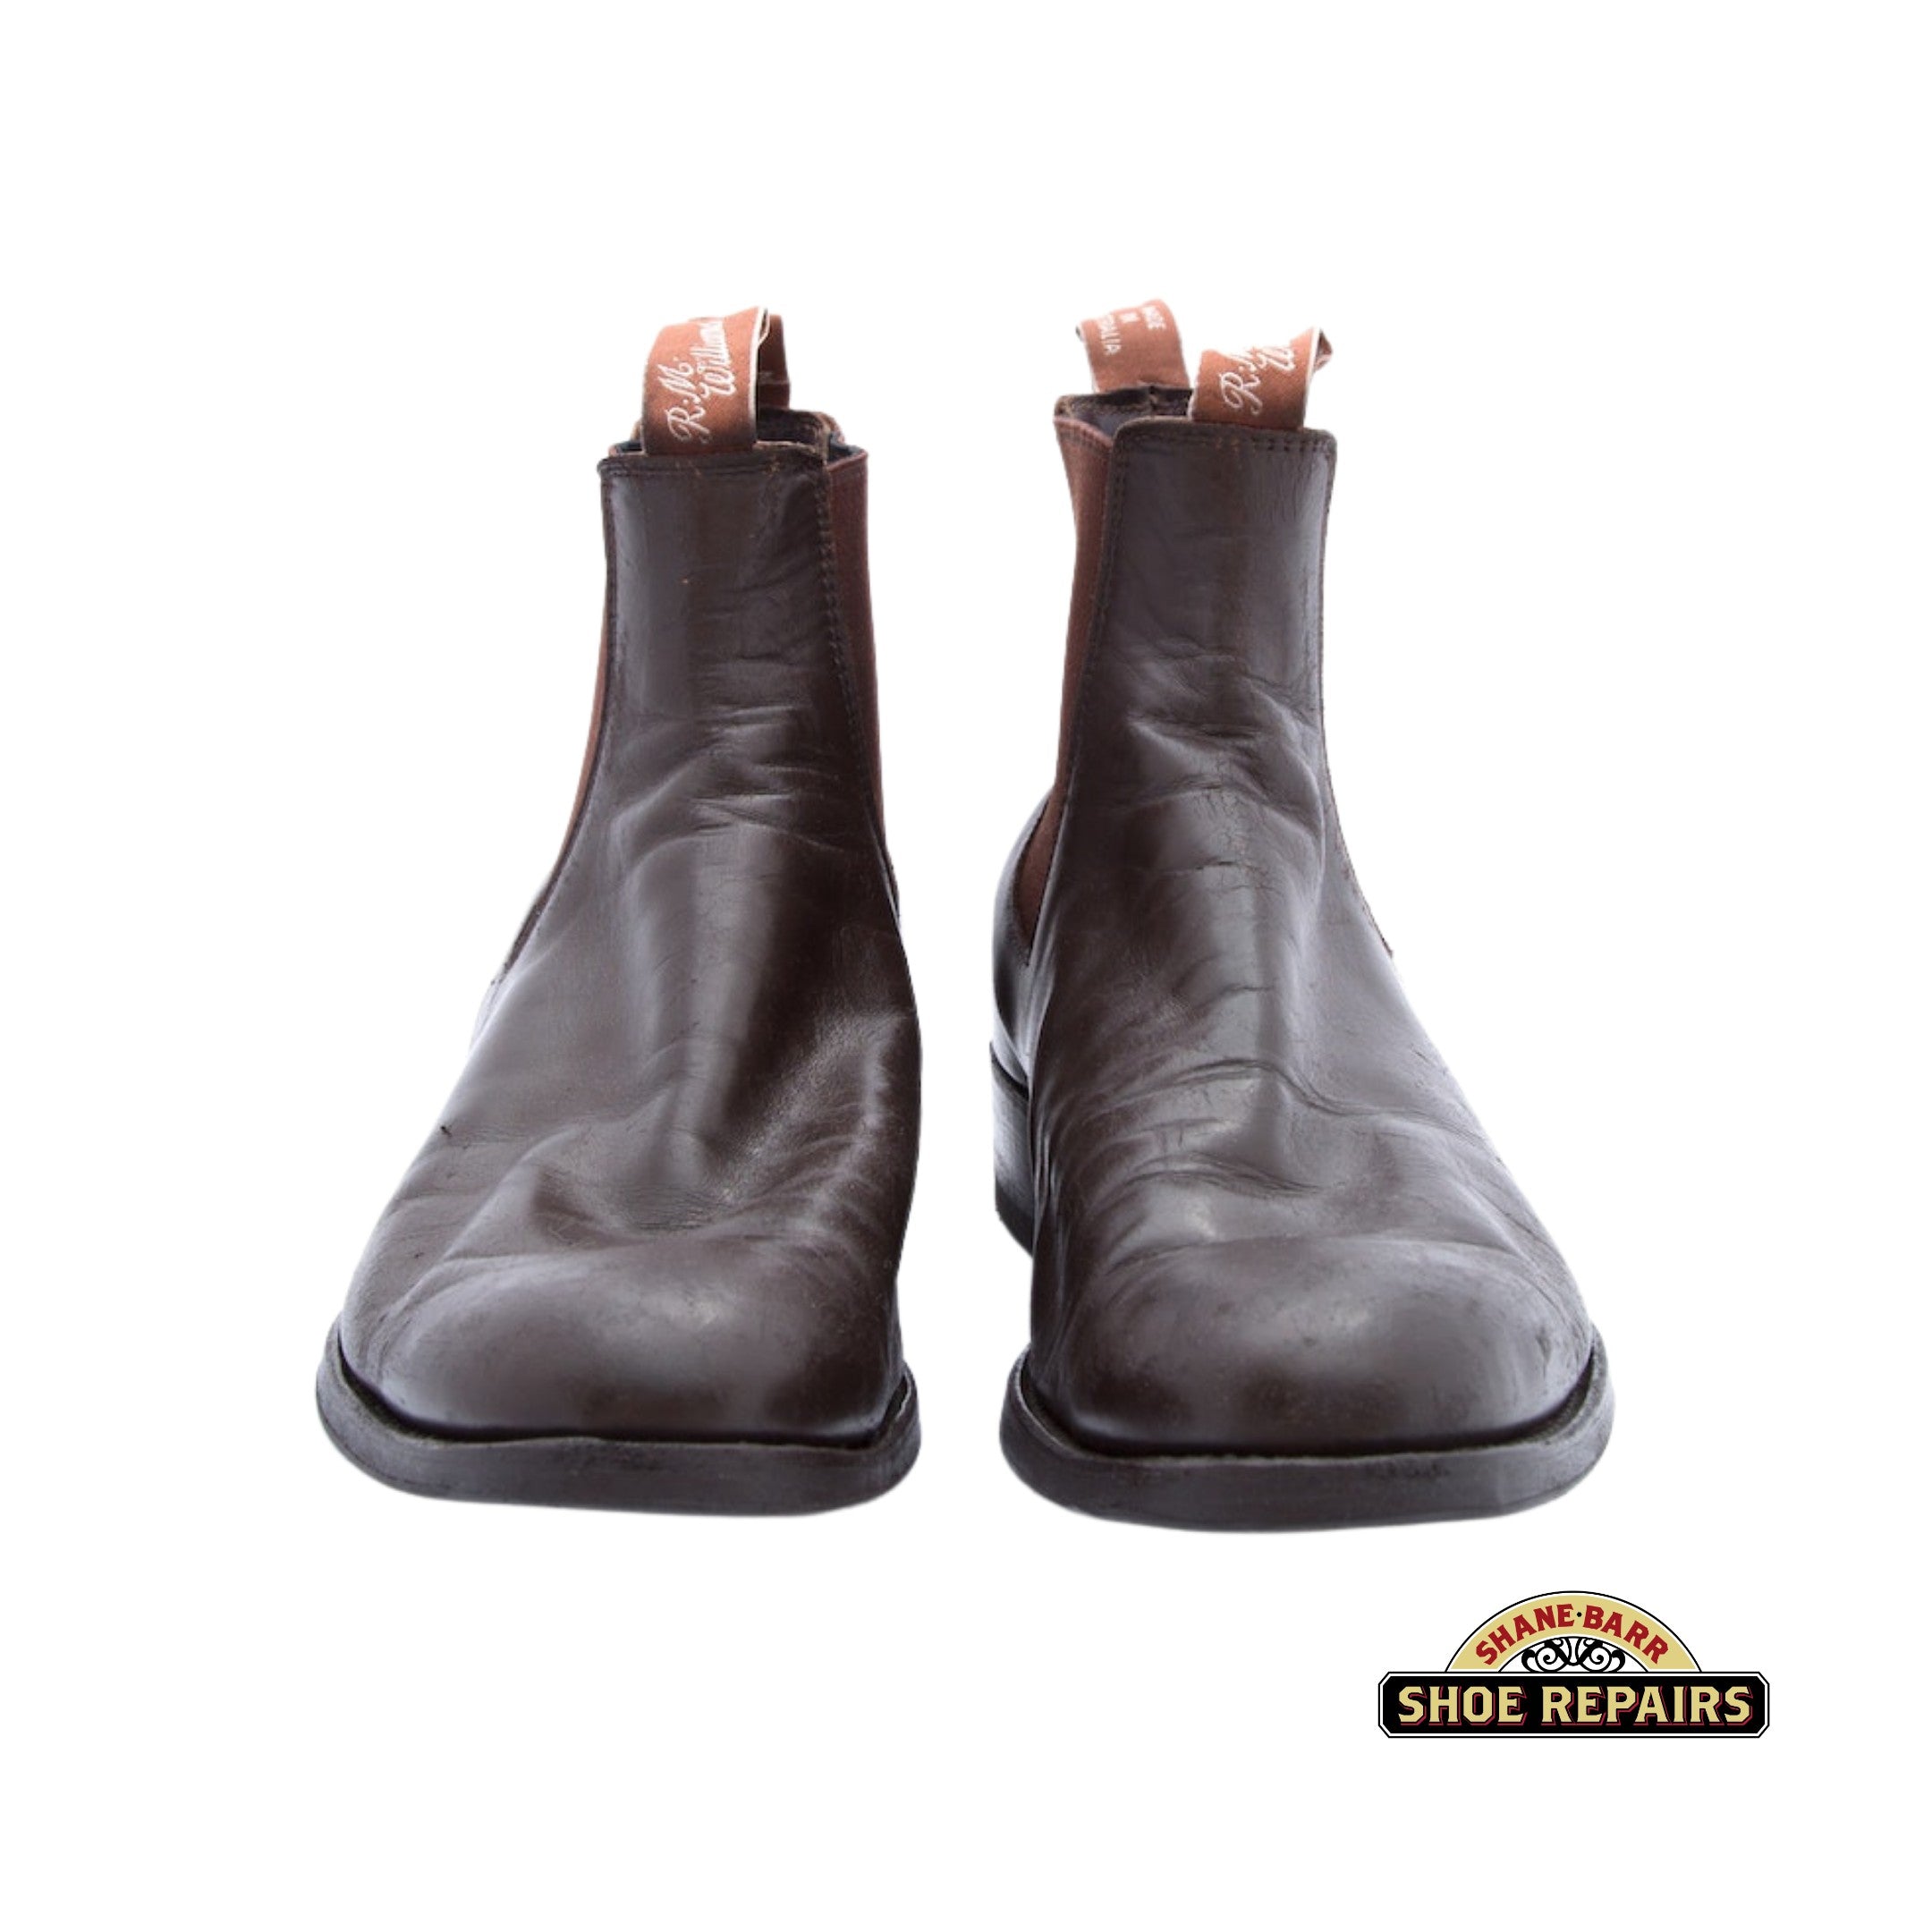 Brown RM Williams Boots After leather care and repair